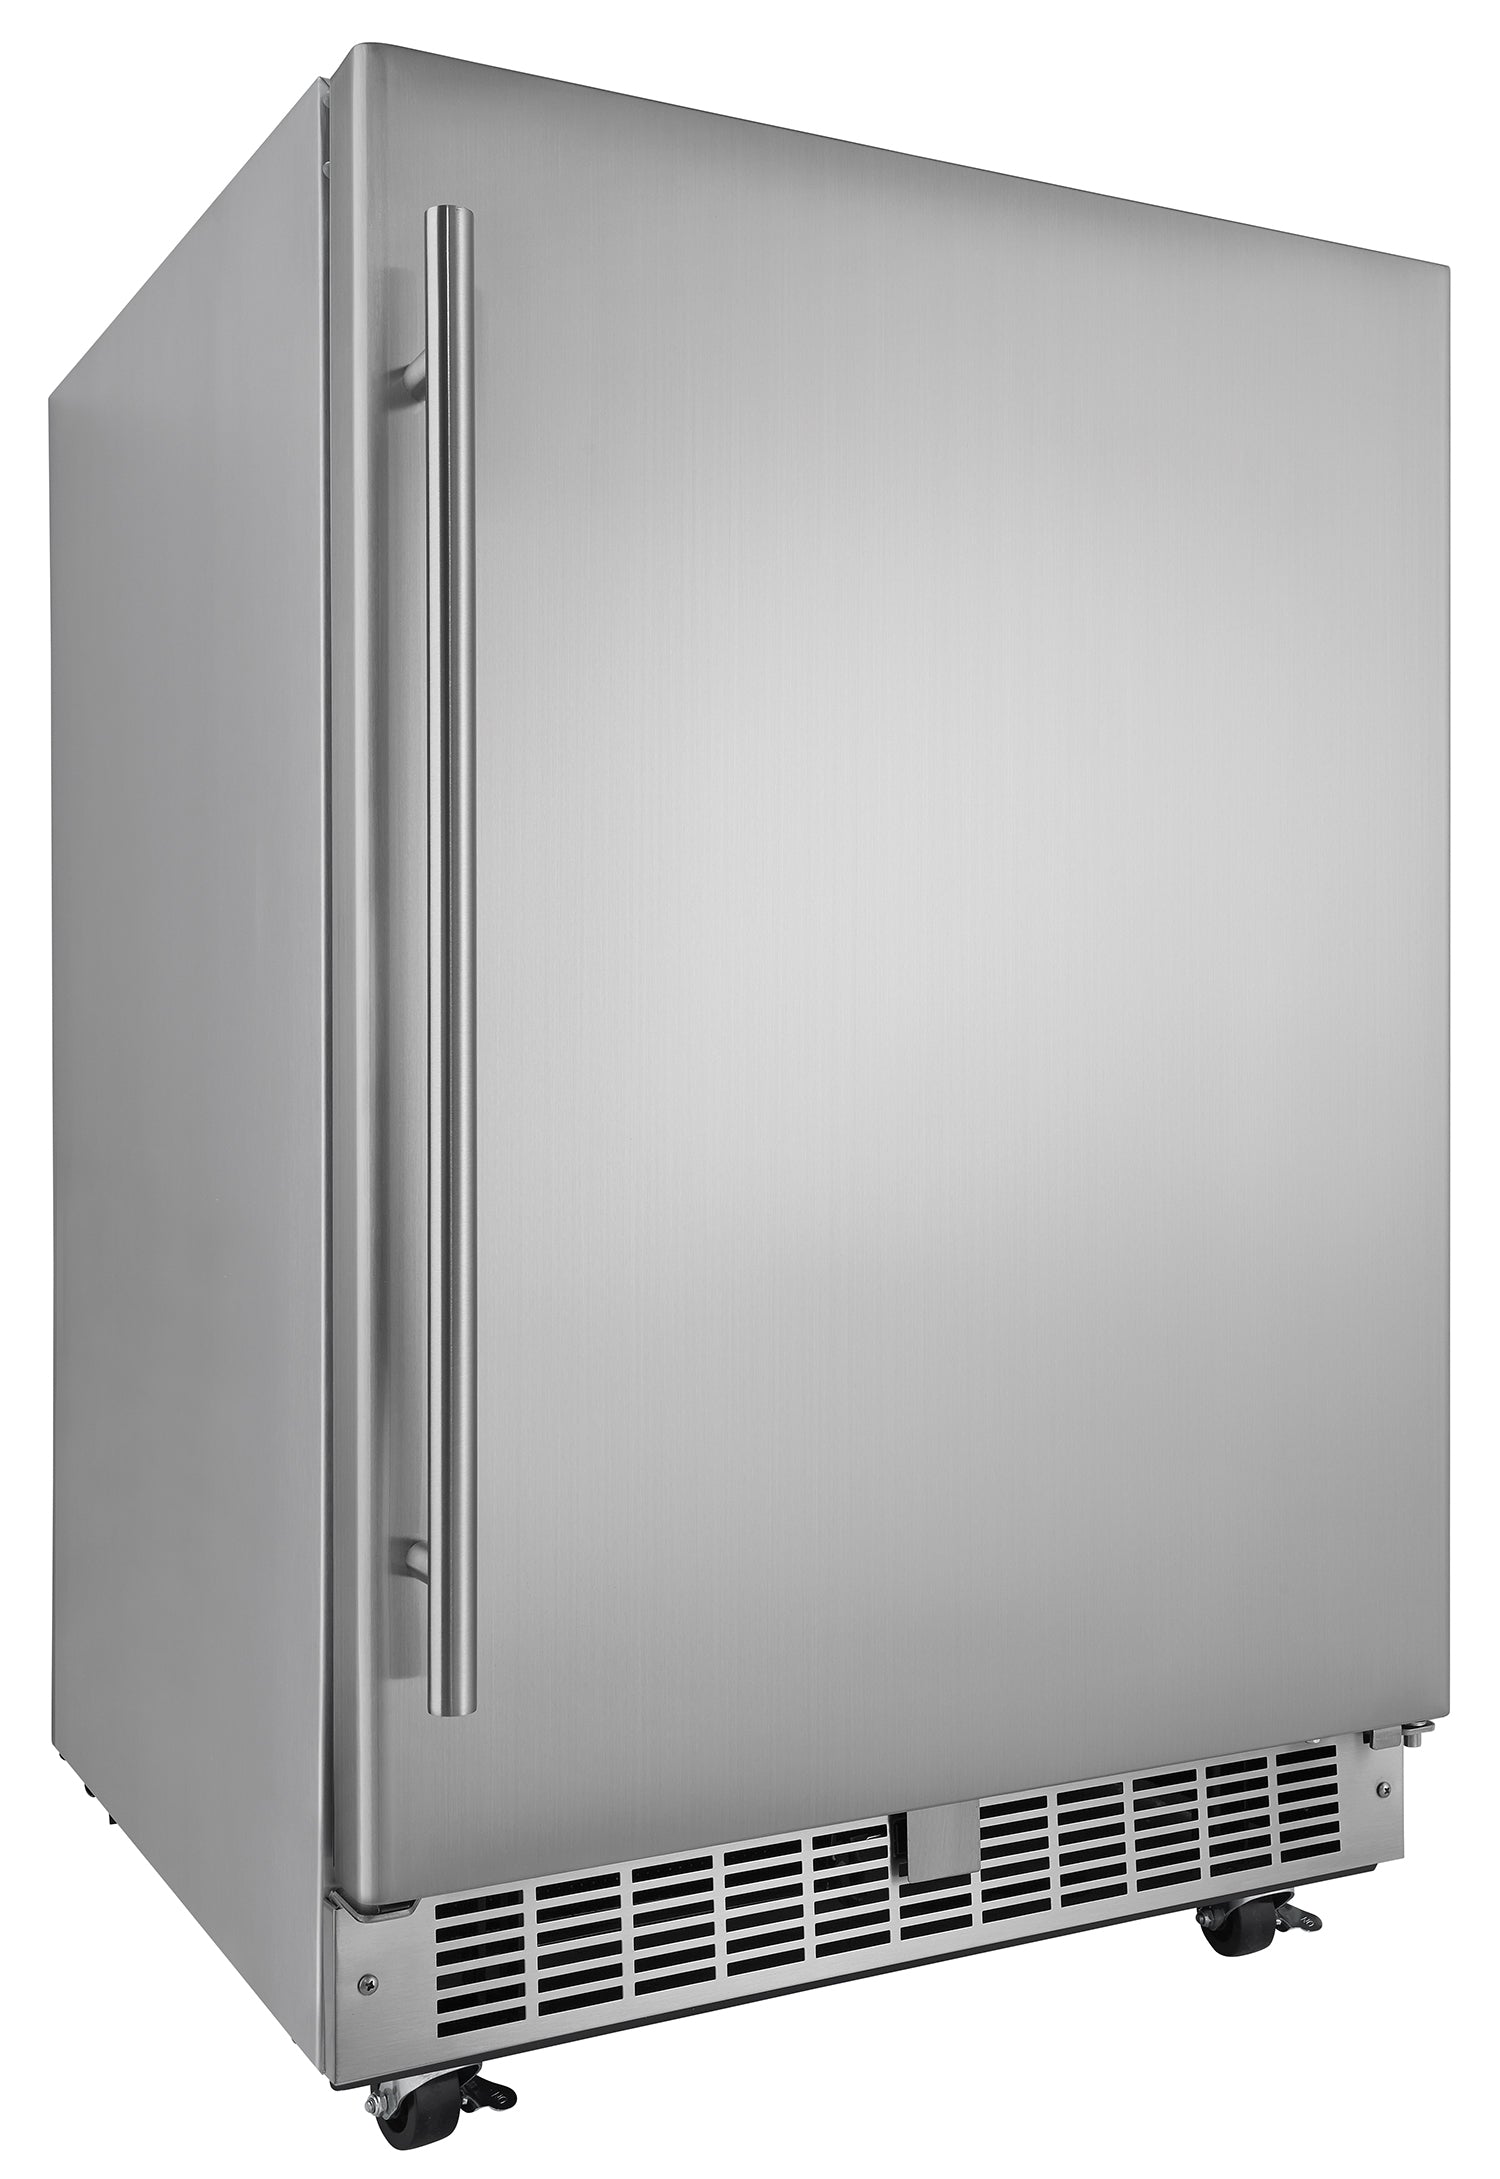 Silhouette - 23.8 Inch 5.5 cu. ft Built In / Integrated Refrigerator in Stainless - DAR055D1BSSPRO